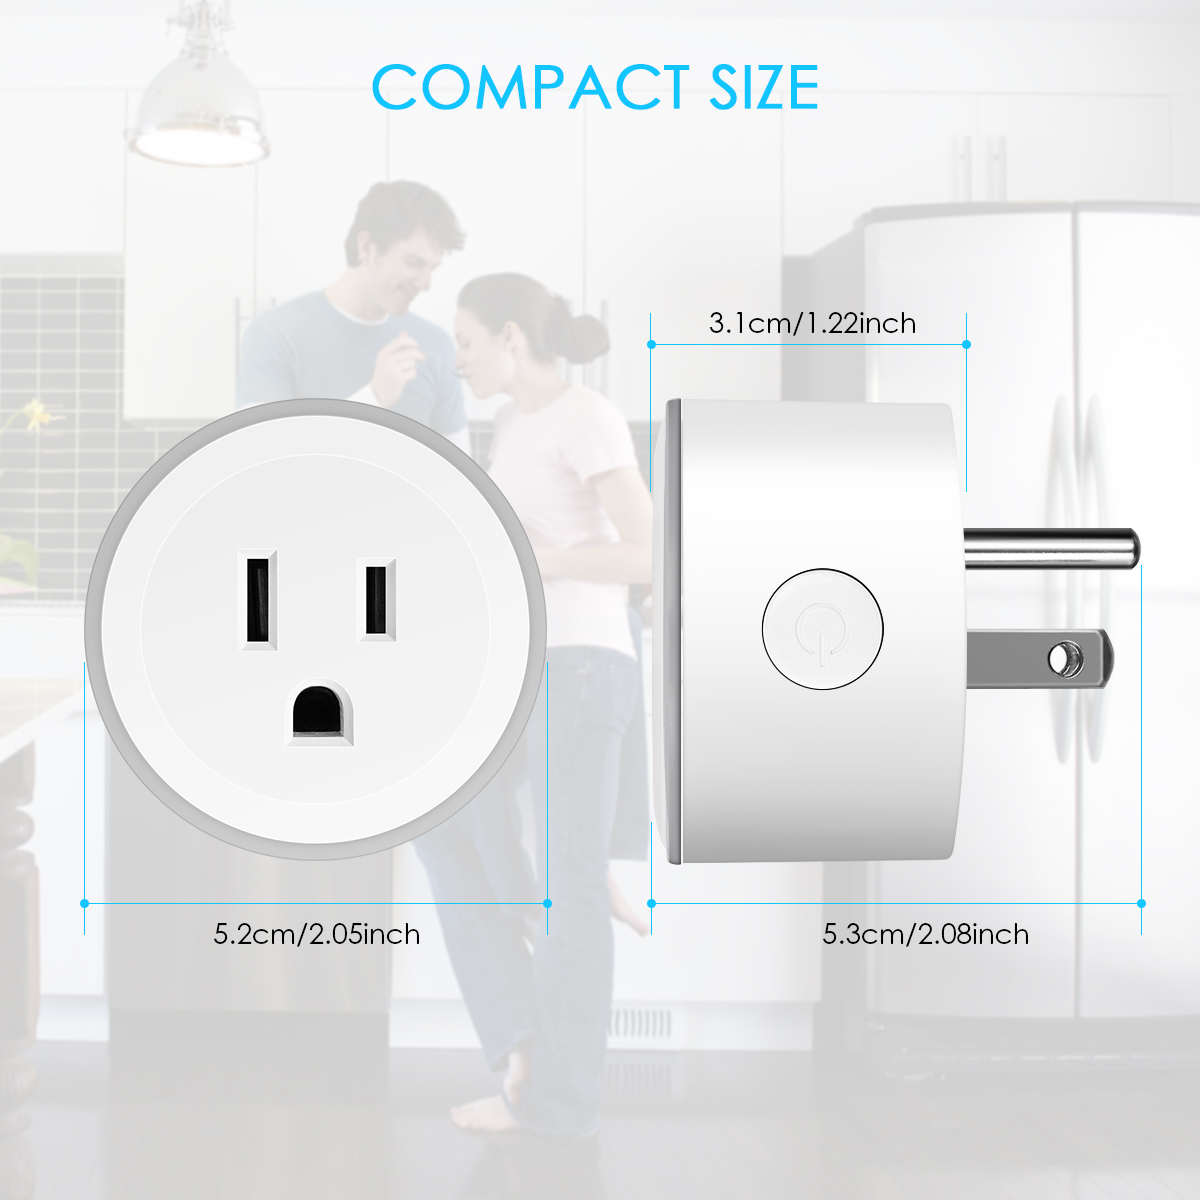 4G WIFI Smart Plug Wireless Remote Control Appliances Power Socket Support Amazon Echo And Google Home